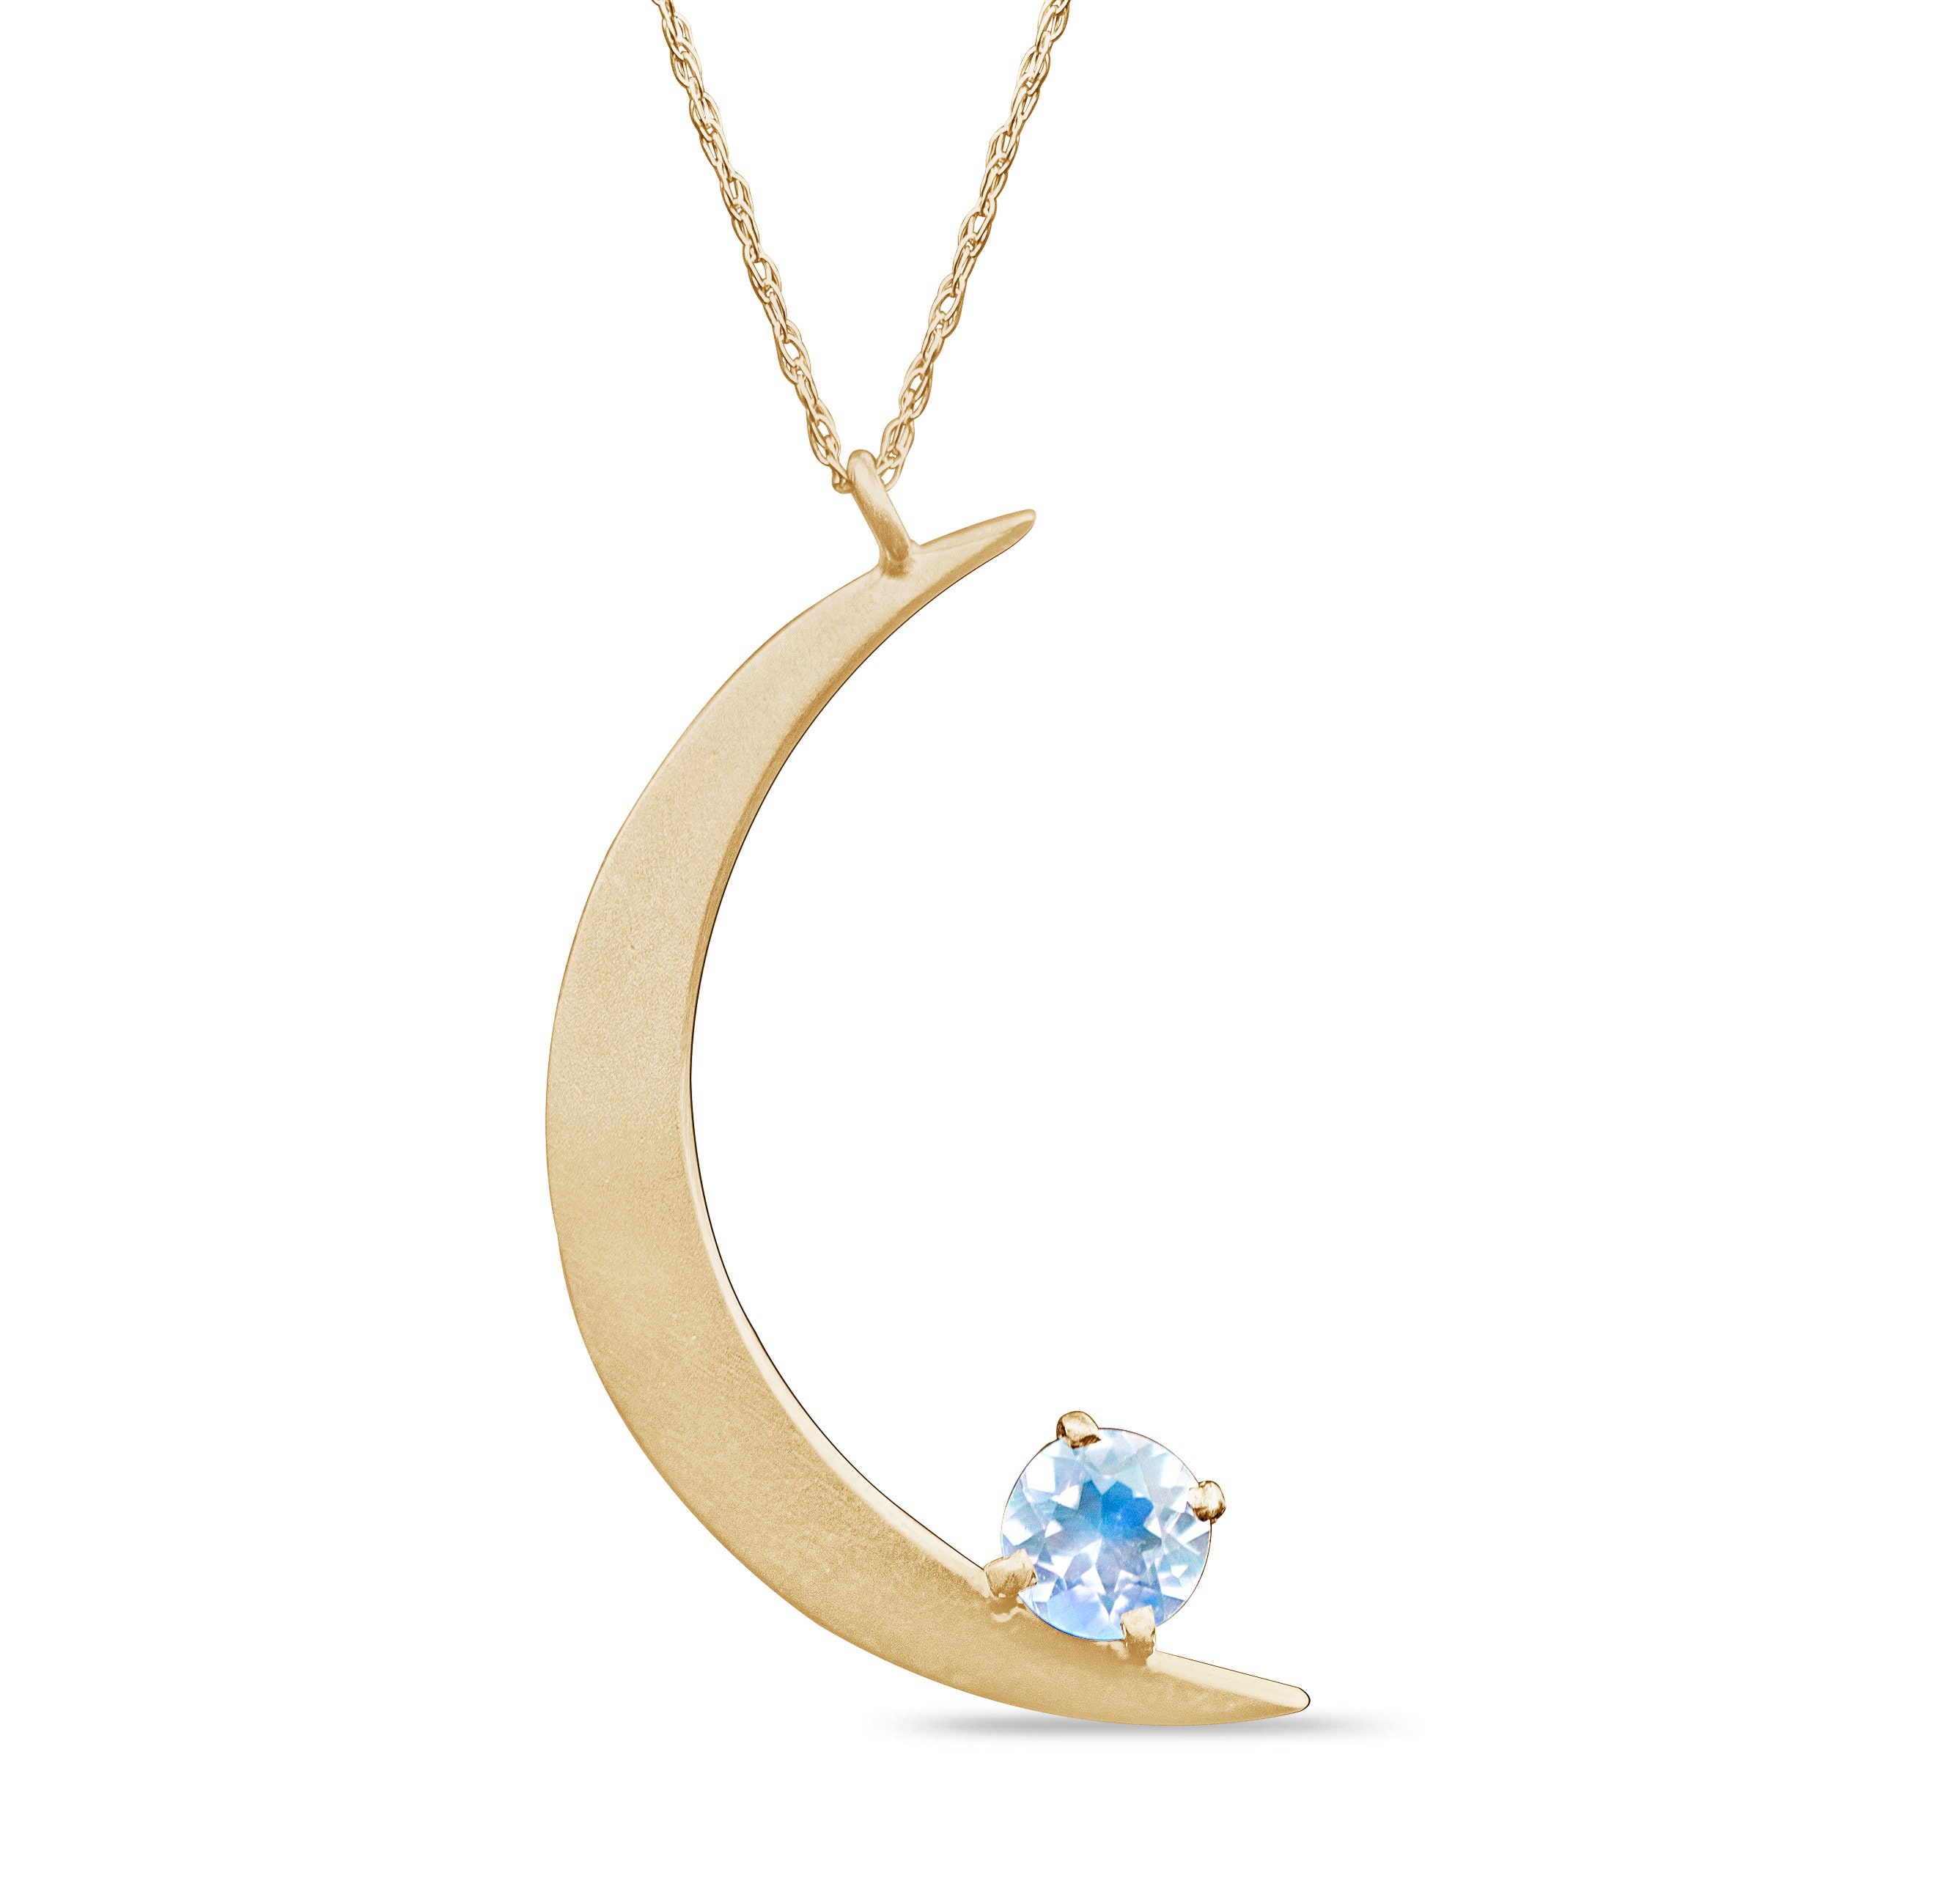 10K YELLOW GOLD CRESCENT MOON PENDANT 18/" NECKLACE